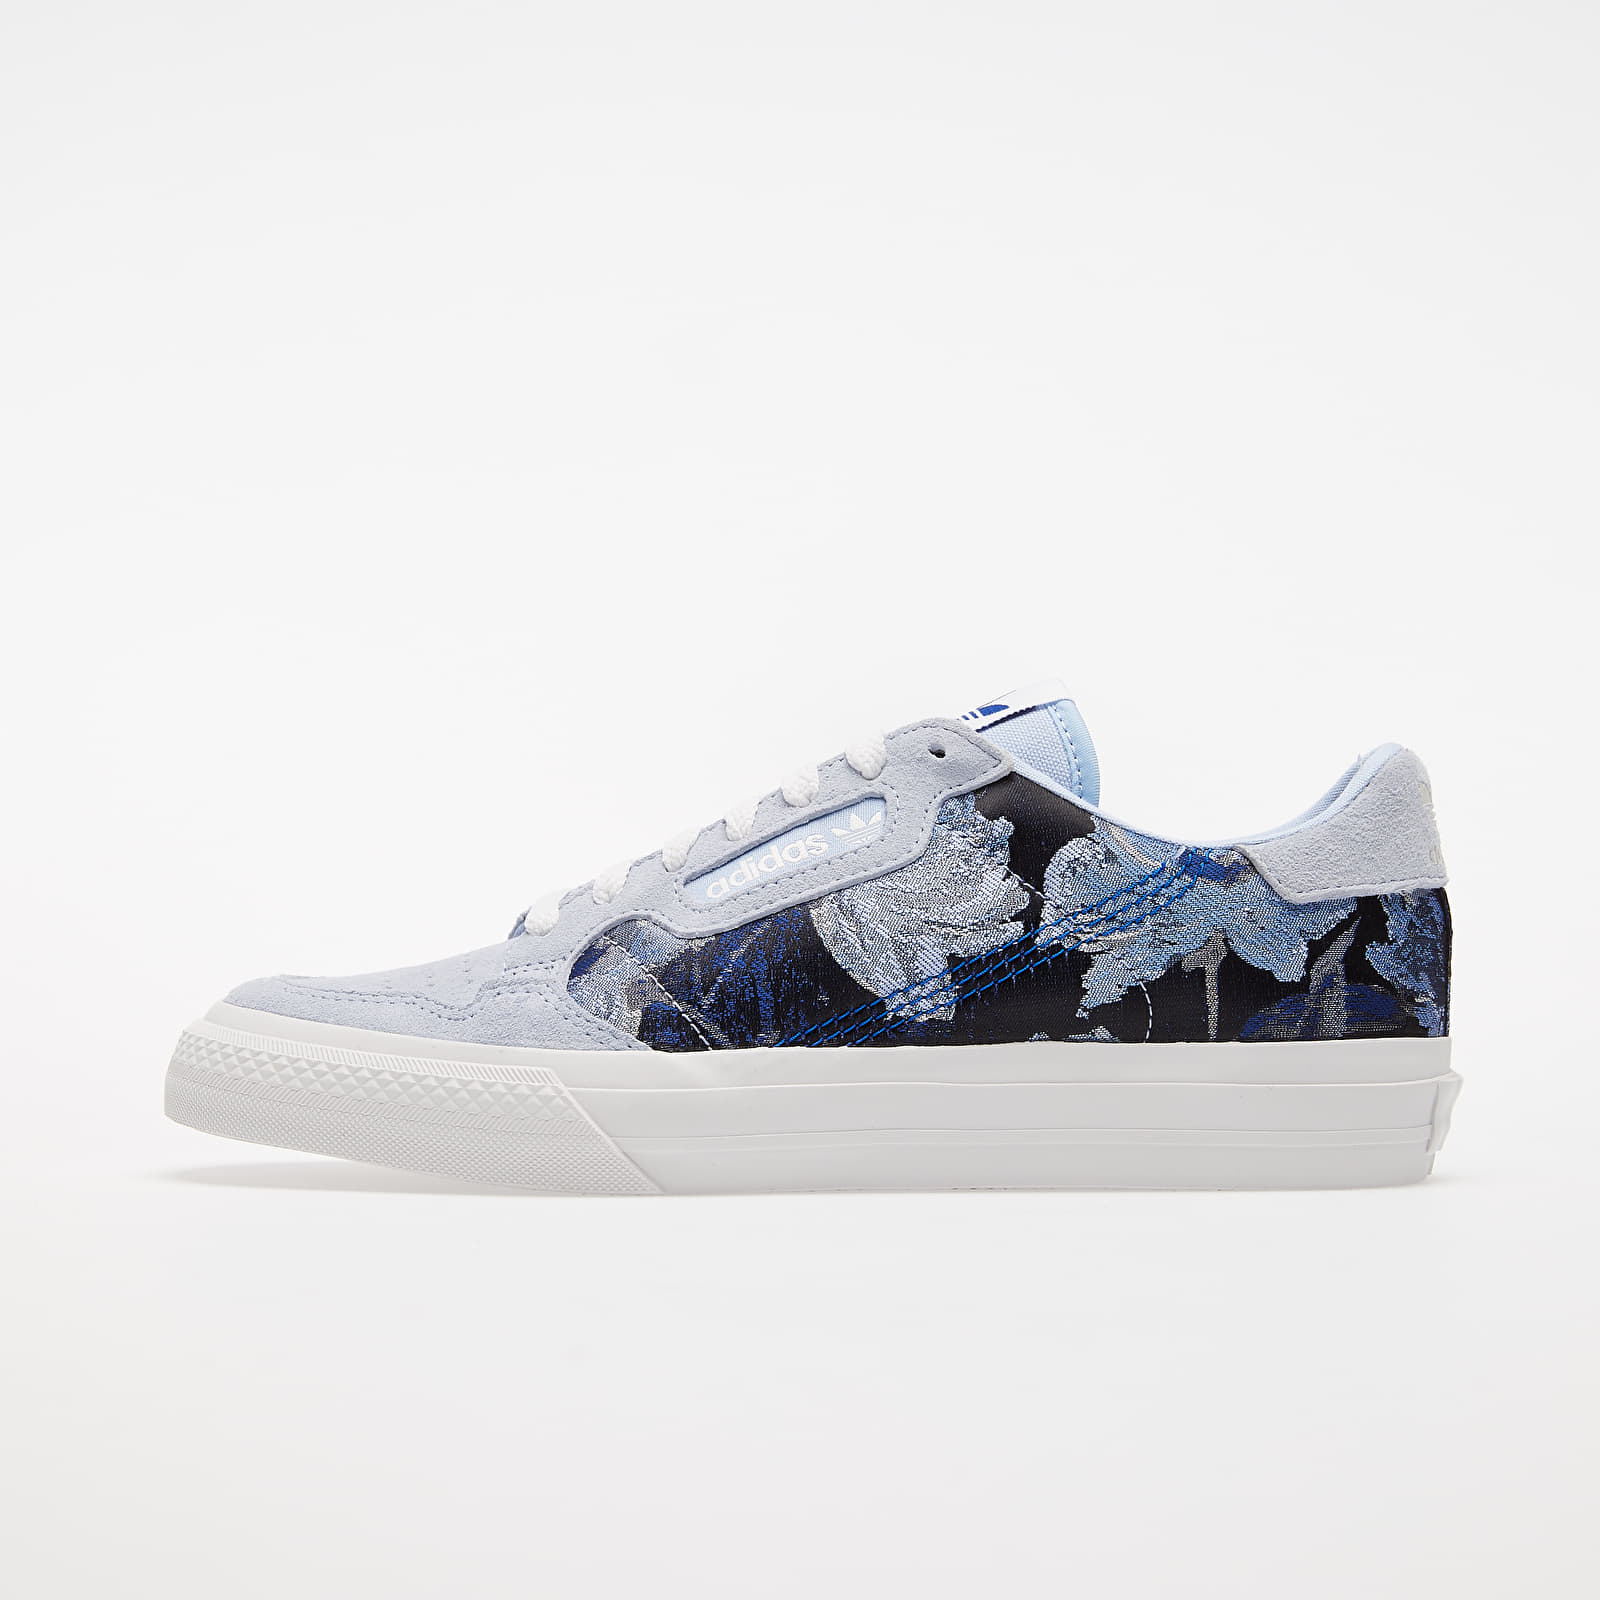 Women's shoes adidas Continental Vulc W Periwinkle/ Crystal White/ Royal Blue